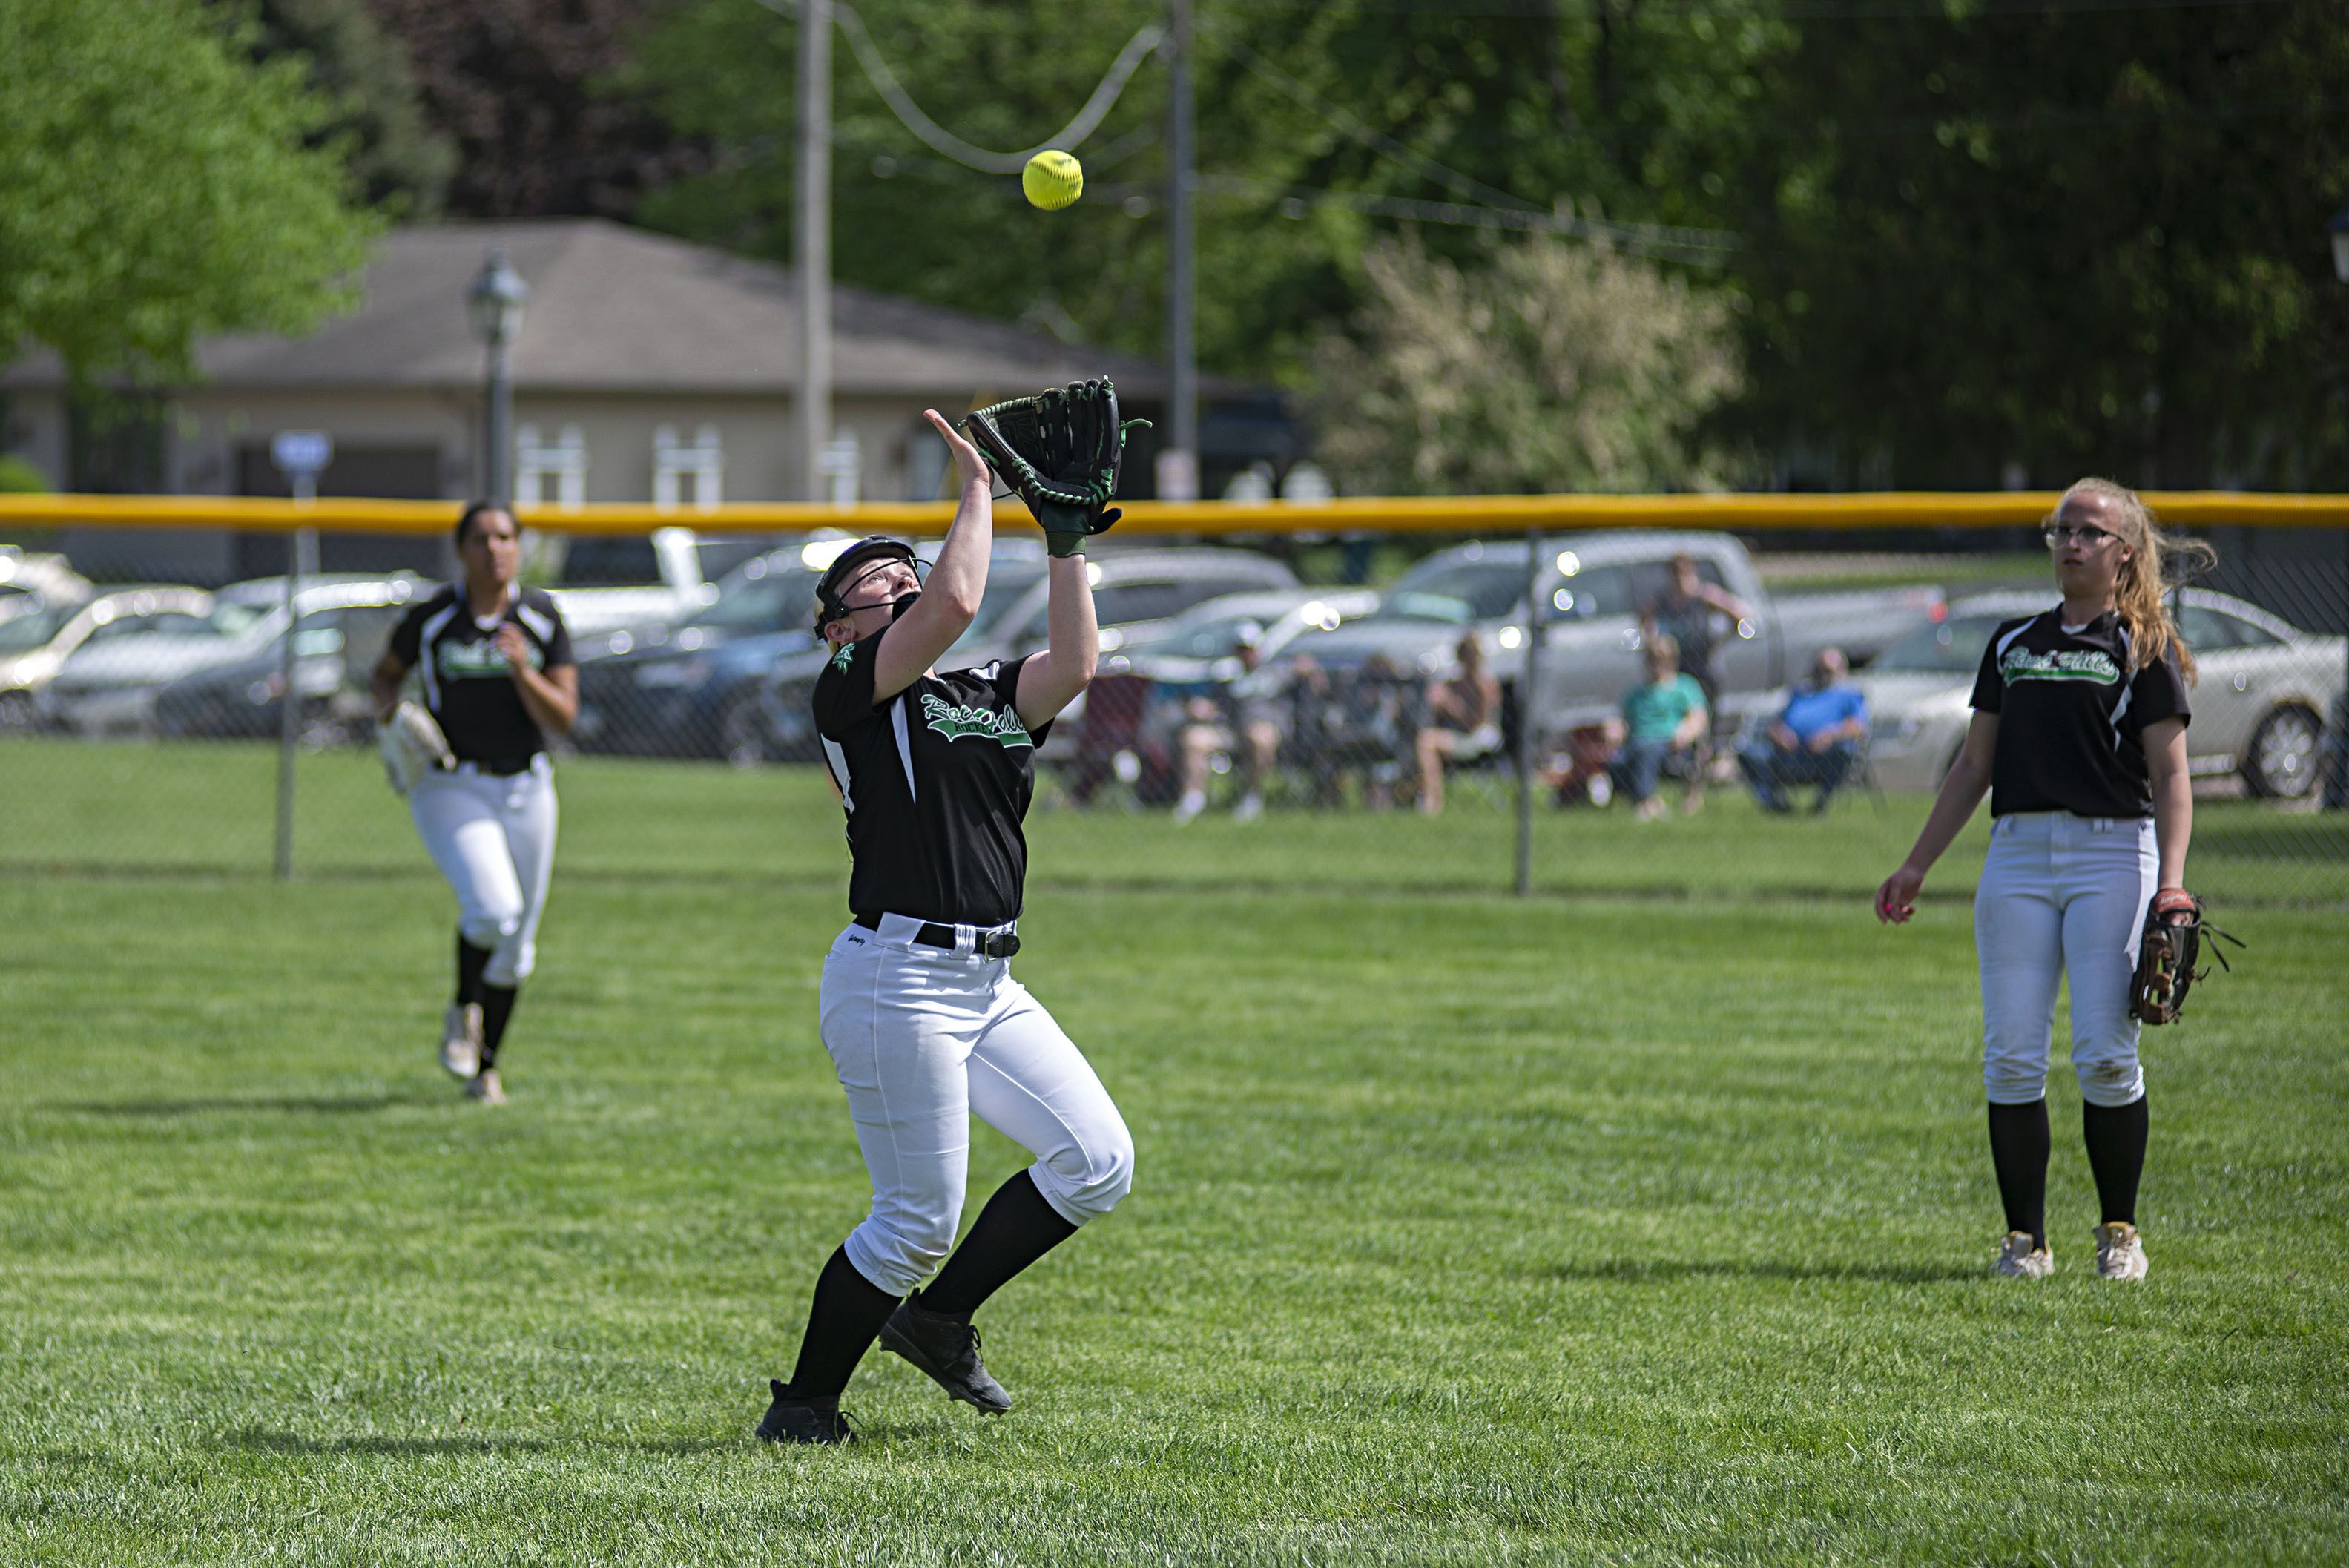 Rock Falls’ Jersey Thomas puts the leather to a fly ball against Sterling on Saturday, May 14, 2022.